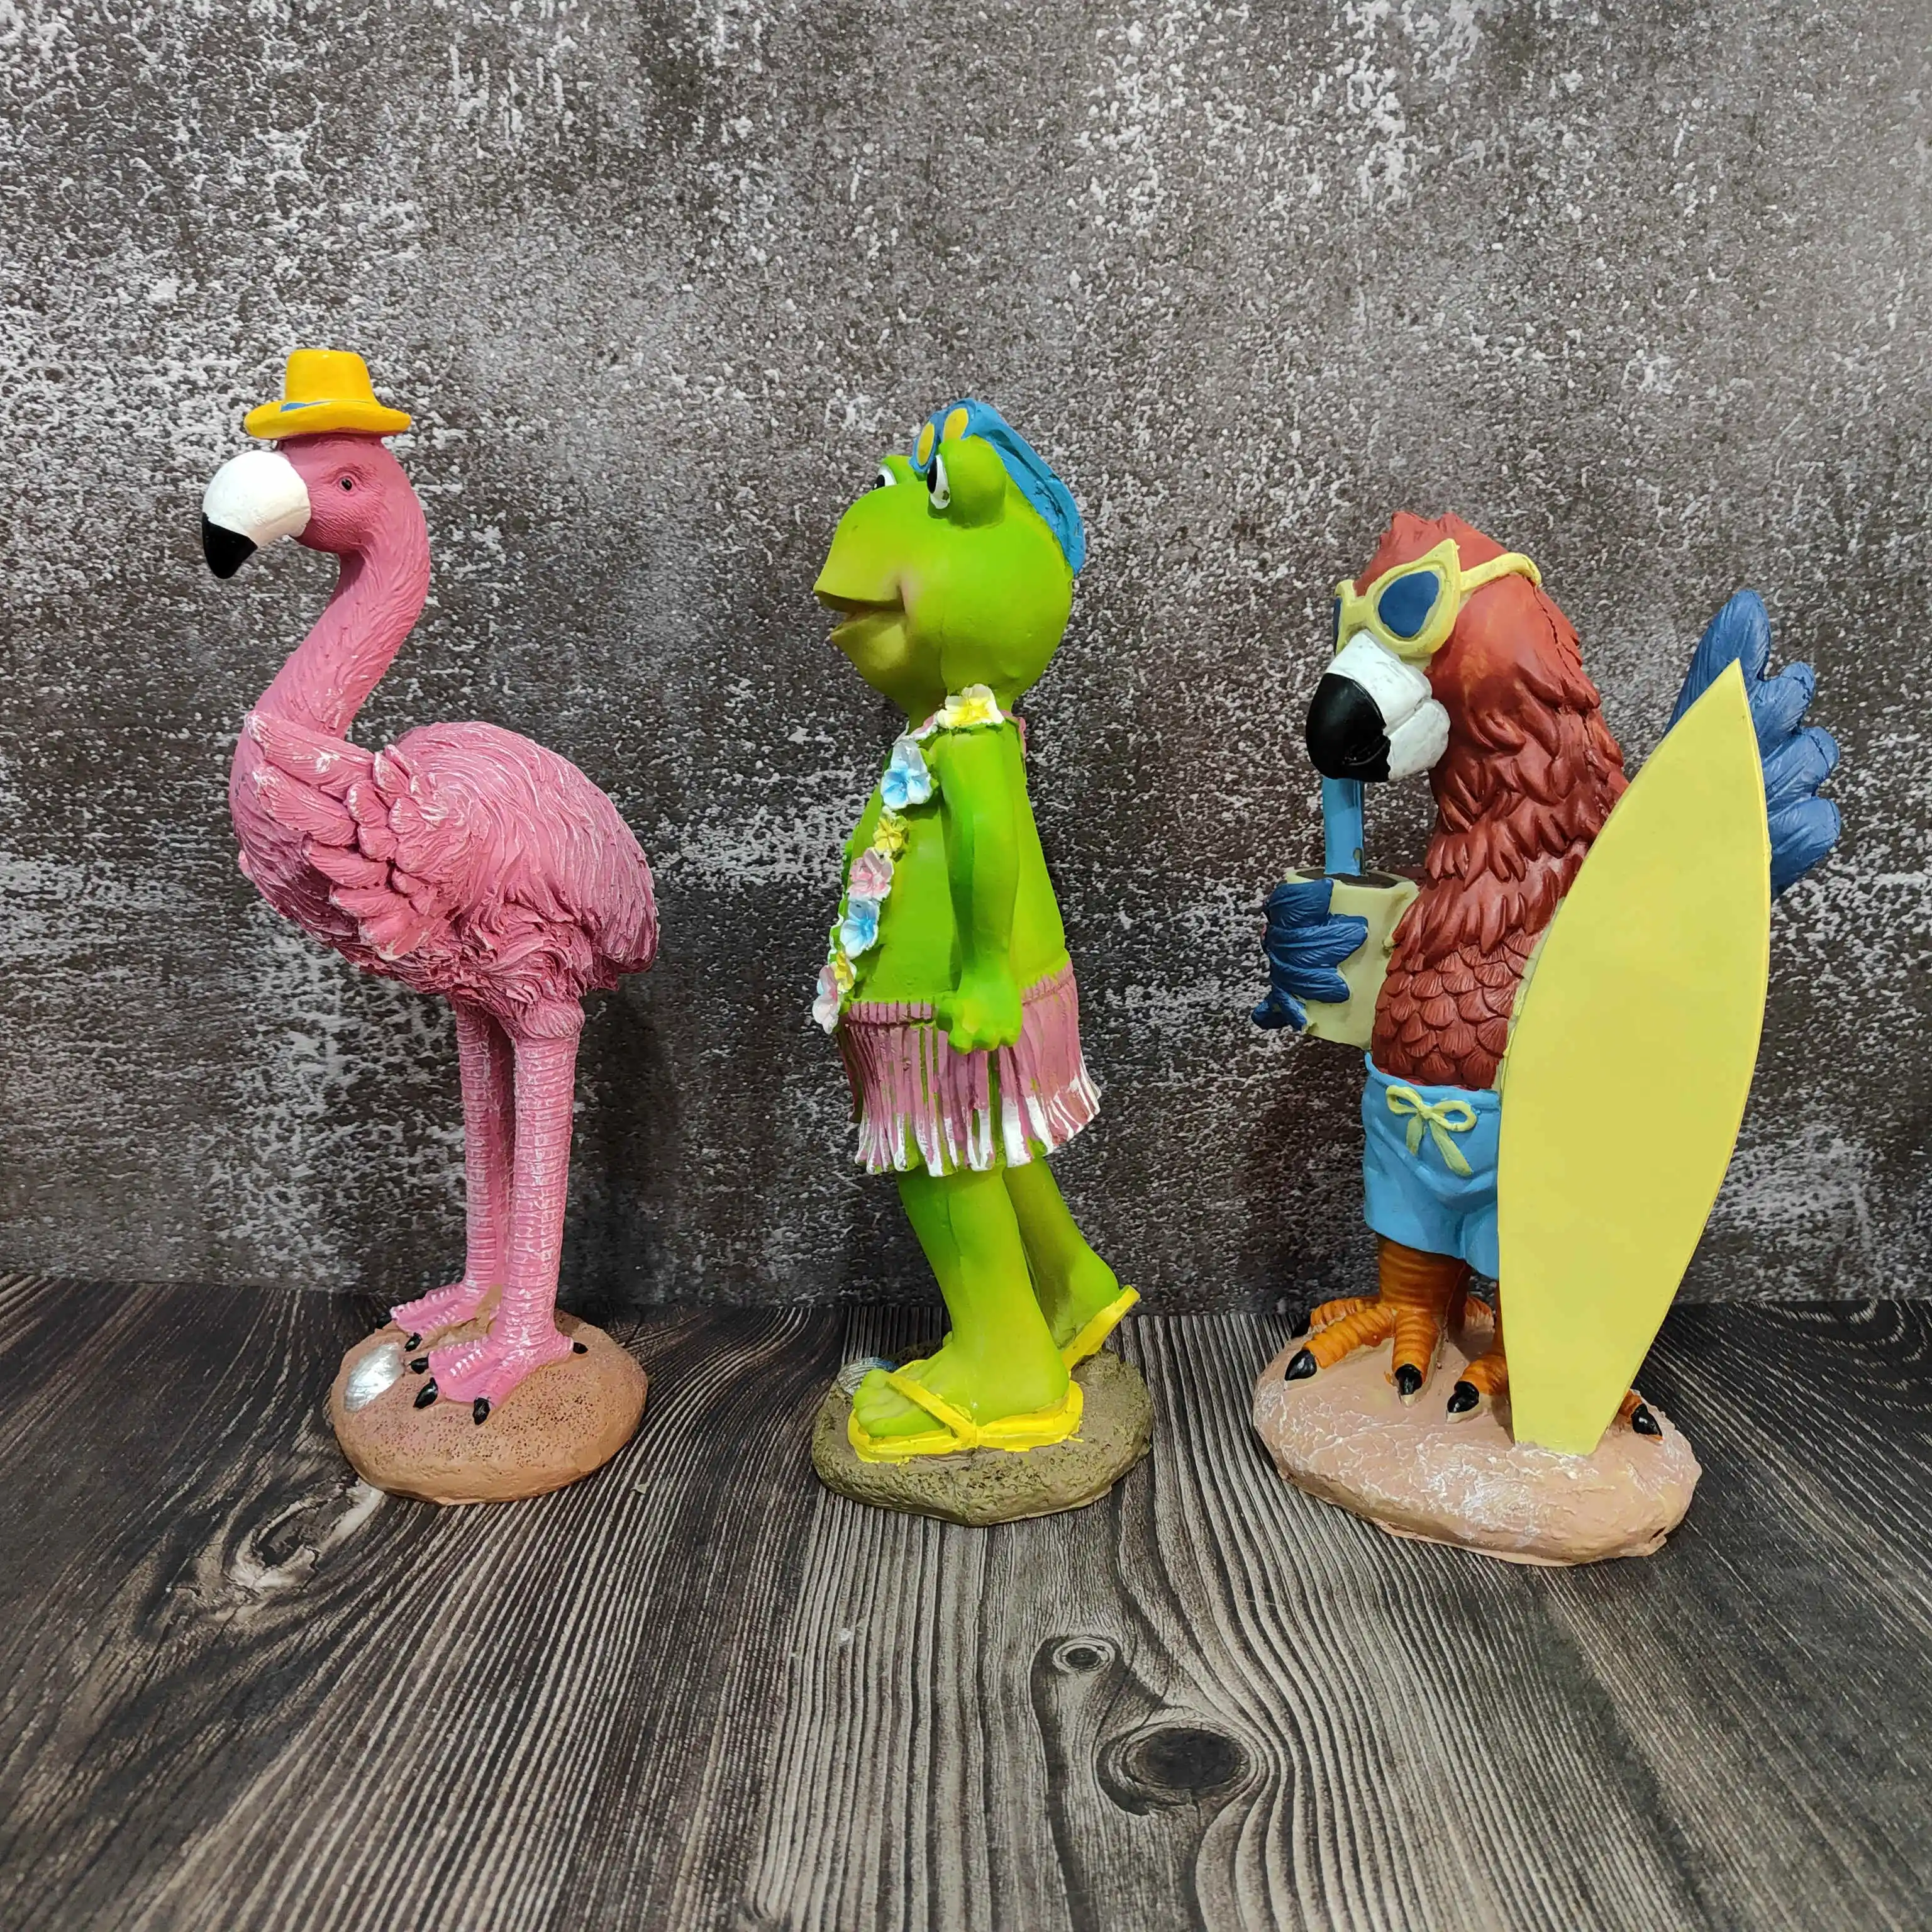 Popular Polyresin Figurines Home Decor Frog Flamingo Gifts Toucan Statue Modern Ornaments Animal Resin Sculpture